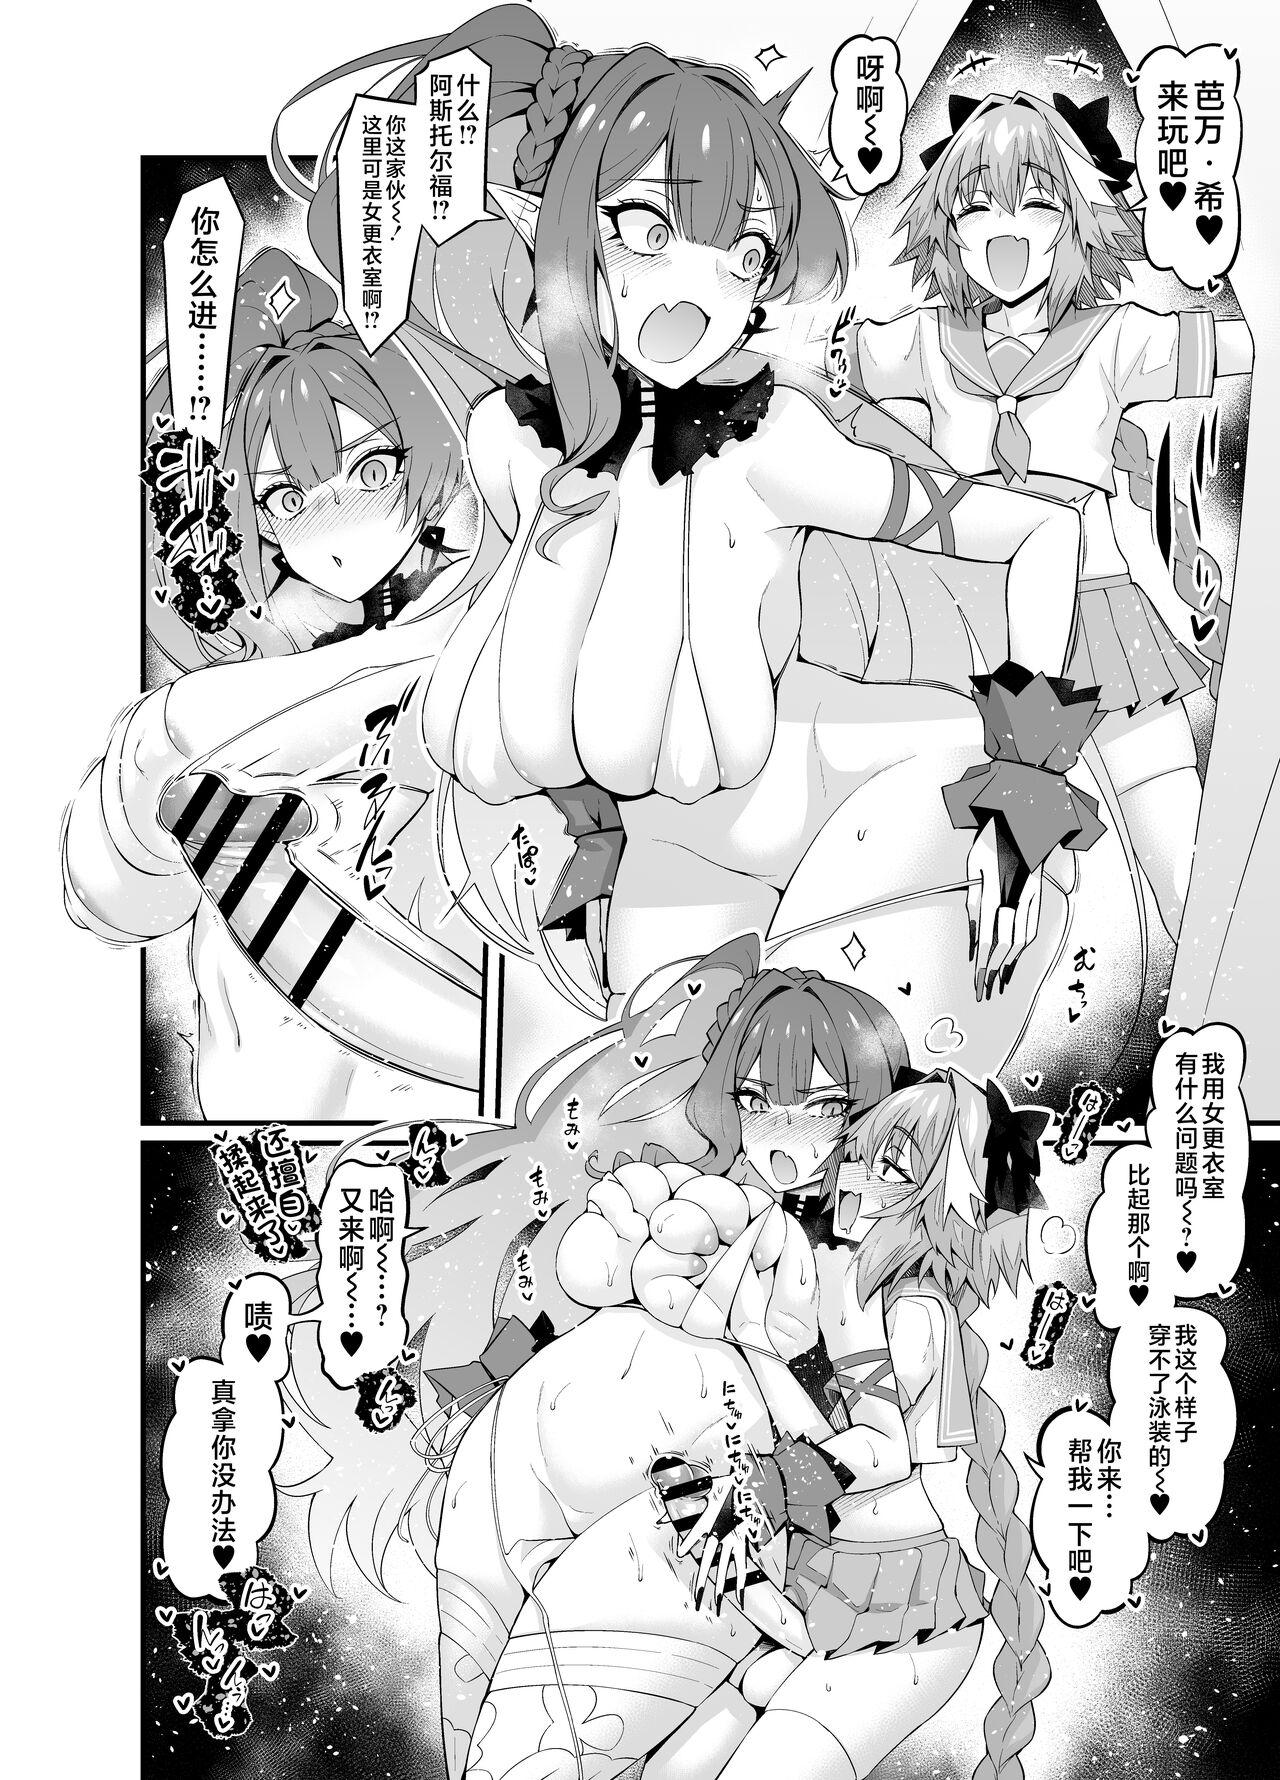 Blow Job Baobhan Sith, Astolfo to Asobu - Fate grand order Ass To Mouth - Page 2